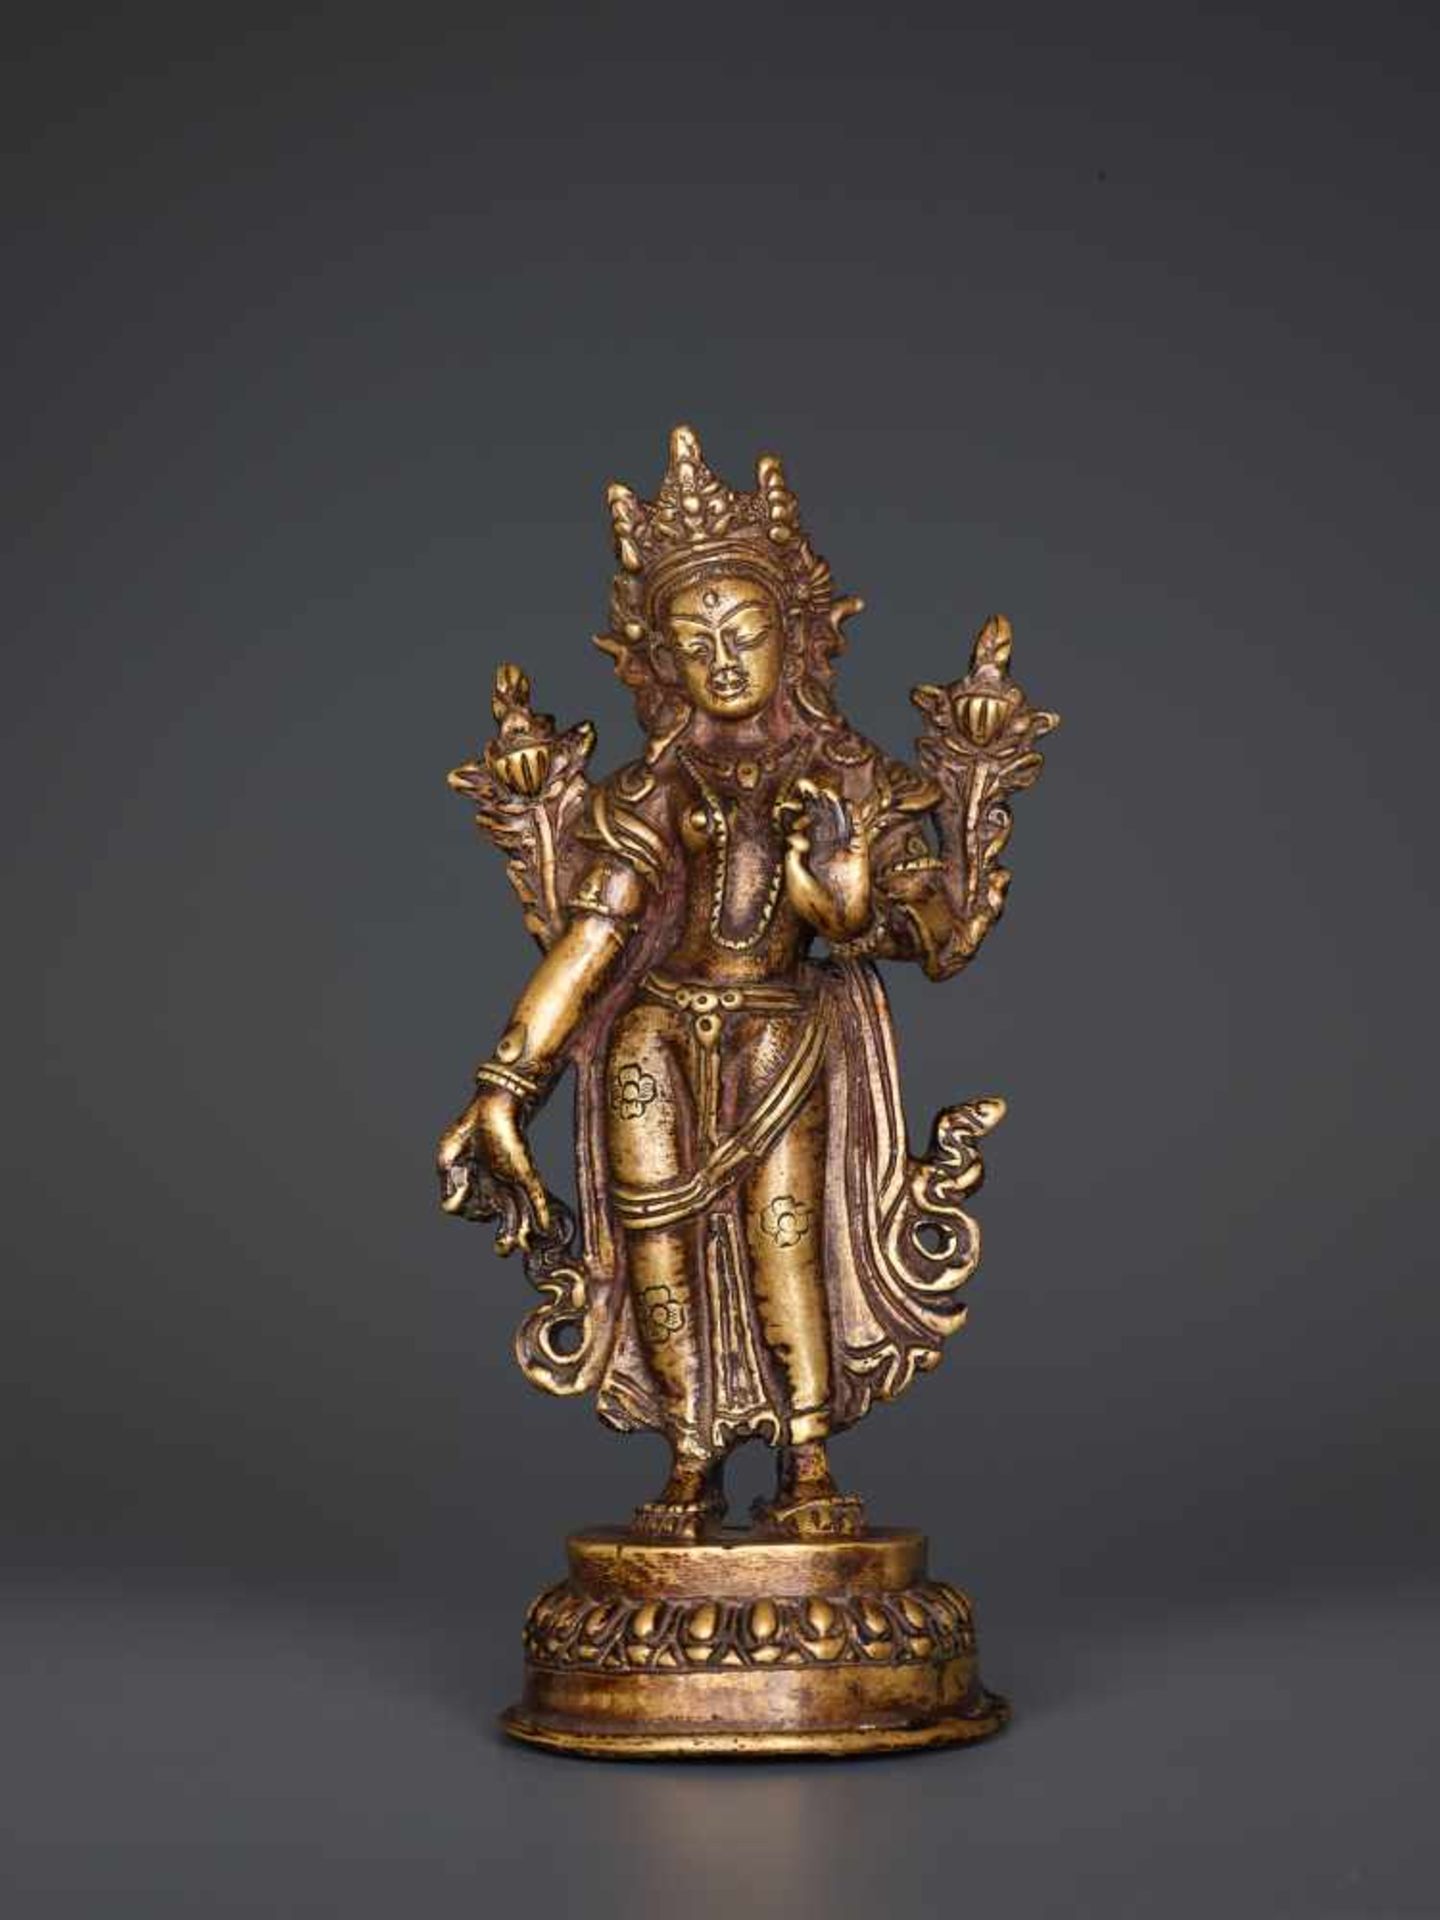 A BRONZE FIGURE OF TARA STANDING IN TRIBHANGA, TIBET, 19th CENTURY Cast and chased bronze, sealed